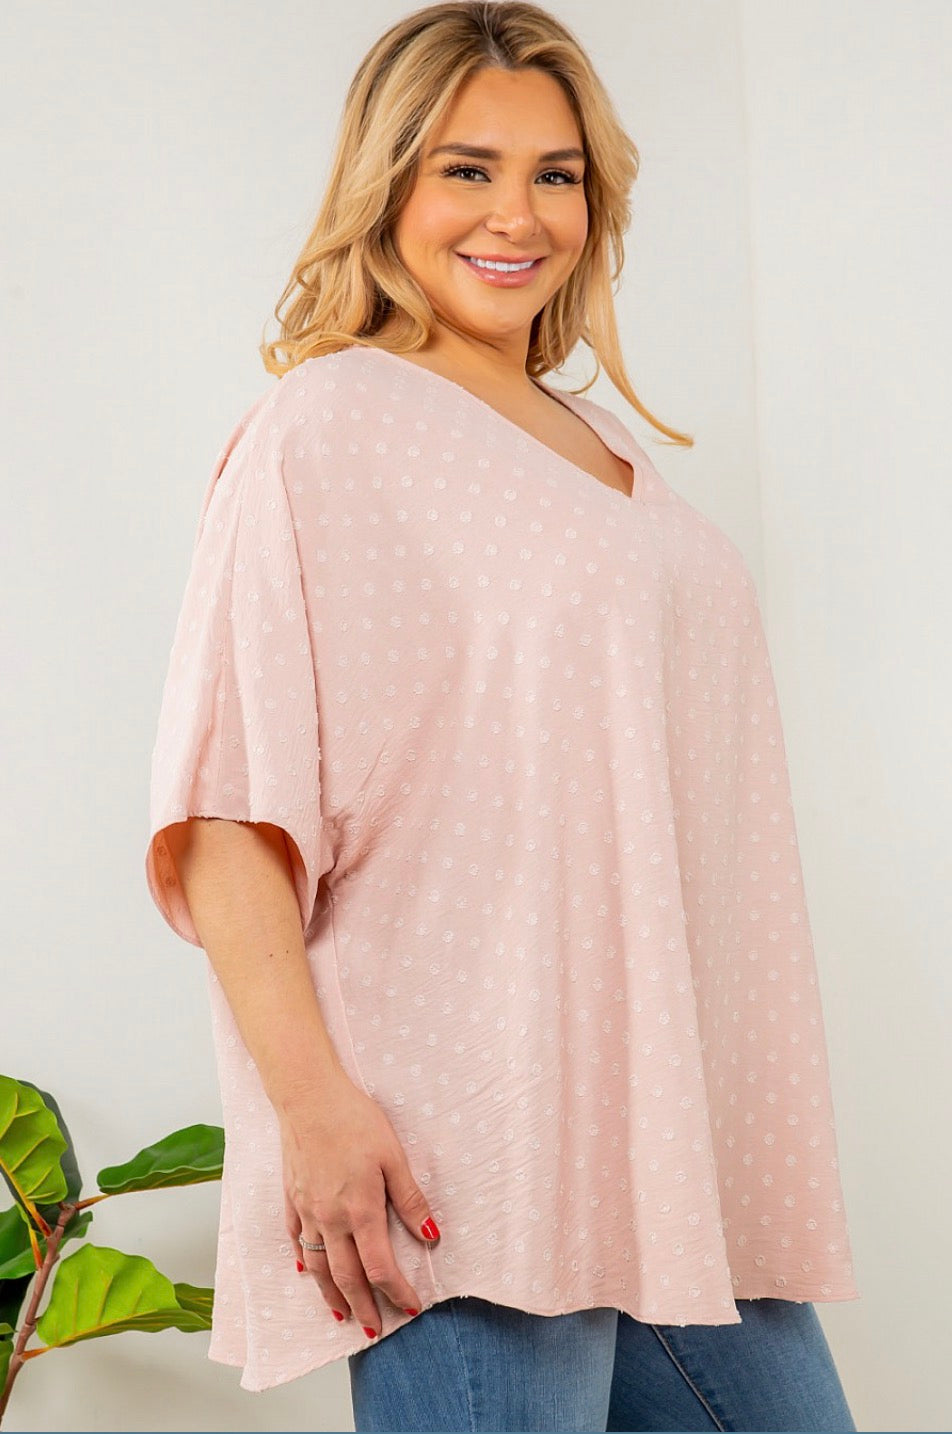 A woman wearing a Spin USA Oversized Dot V Neck Top in pink with white polka dots.